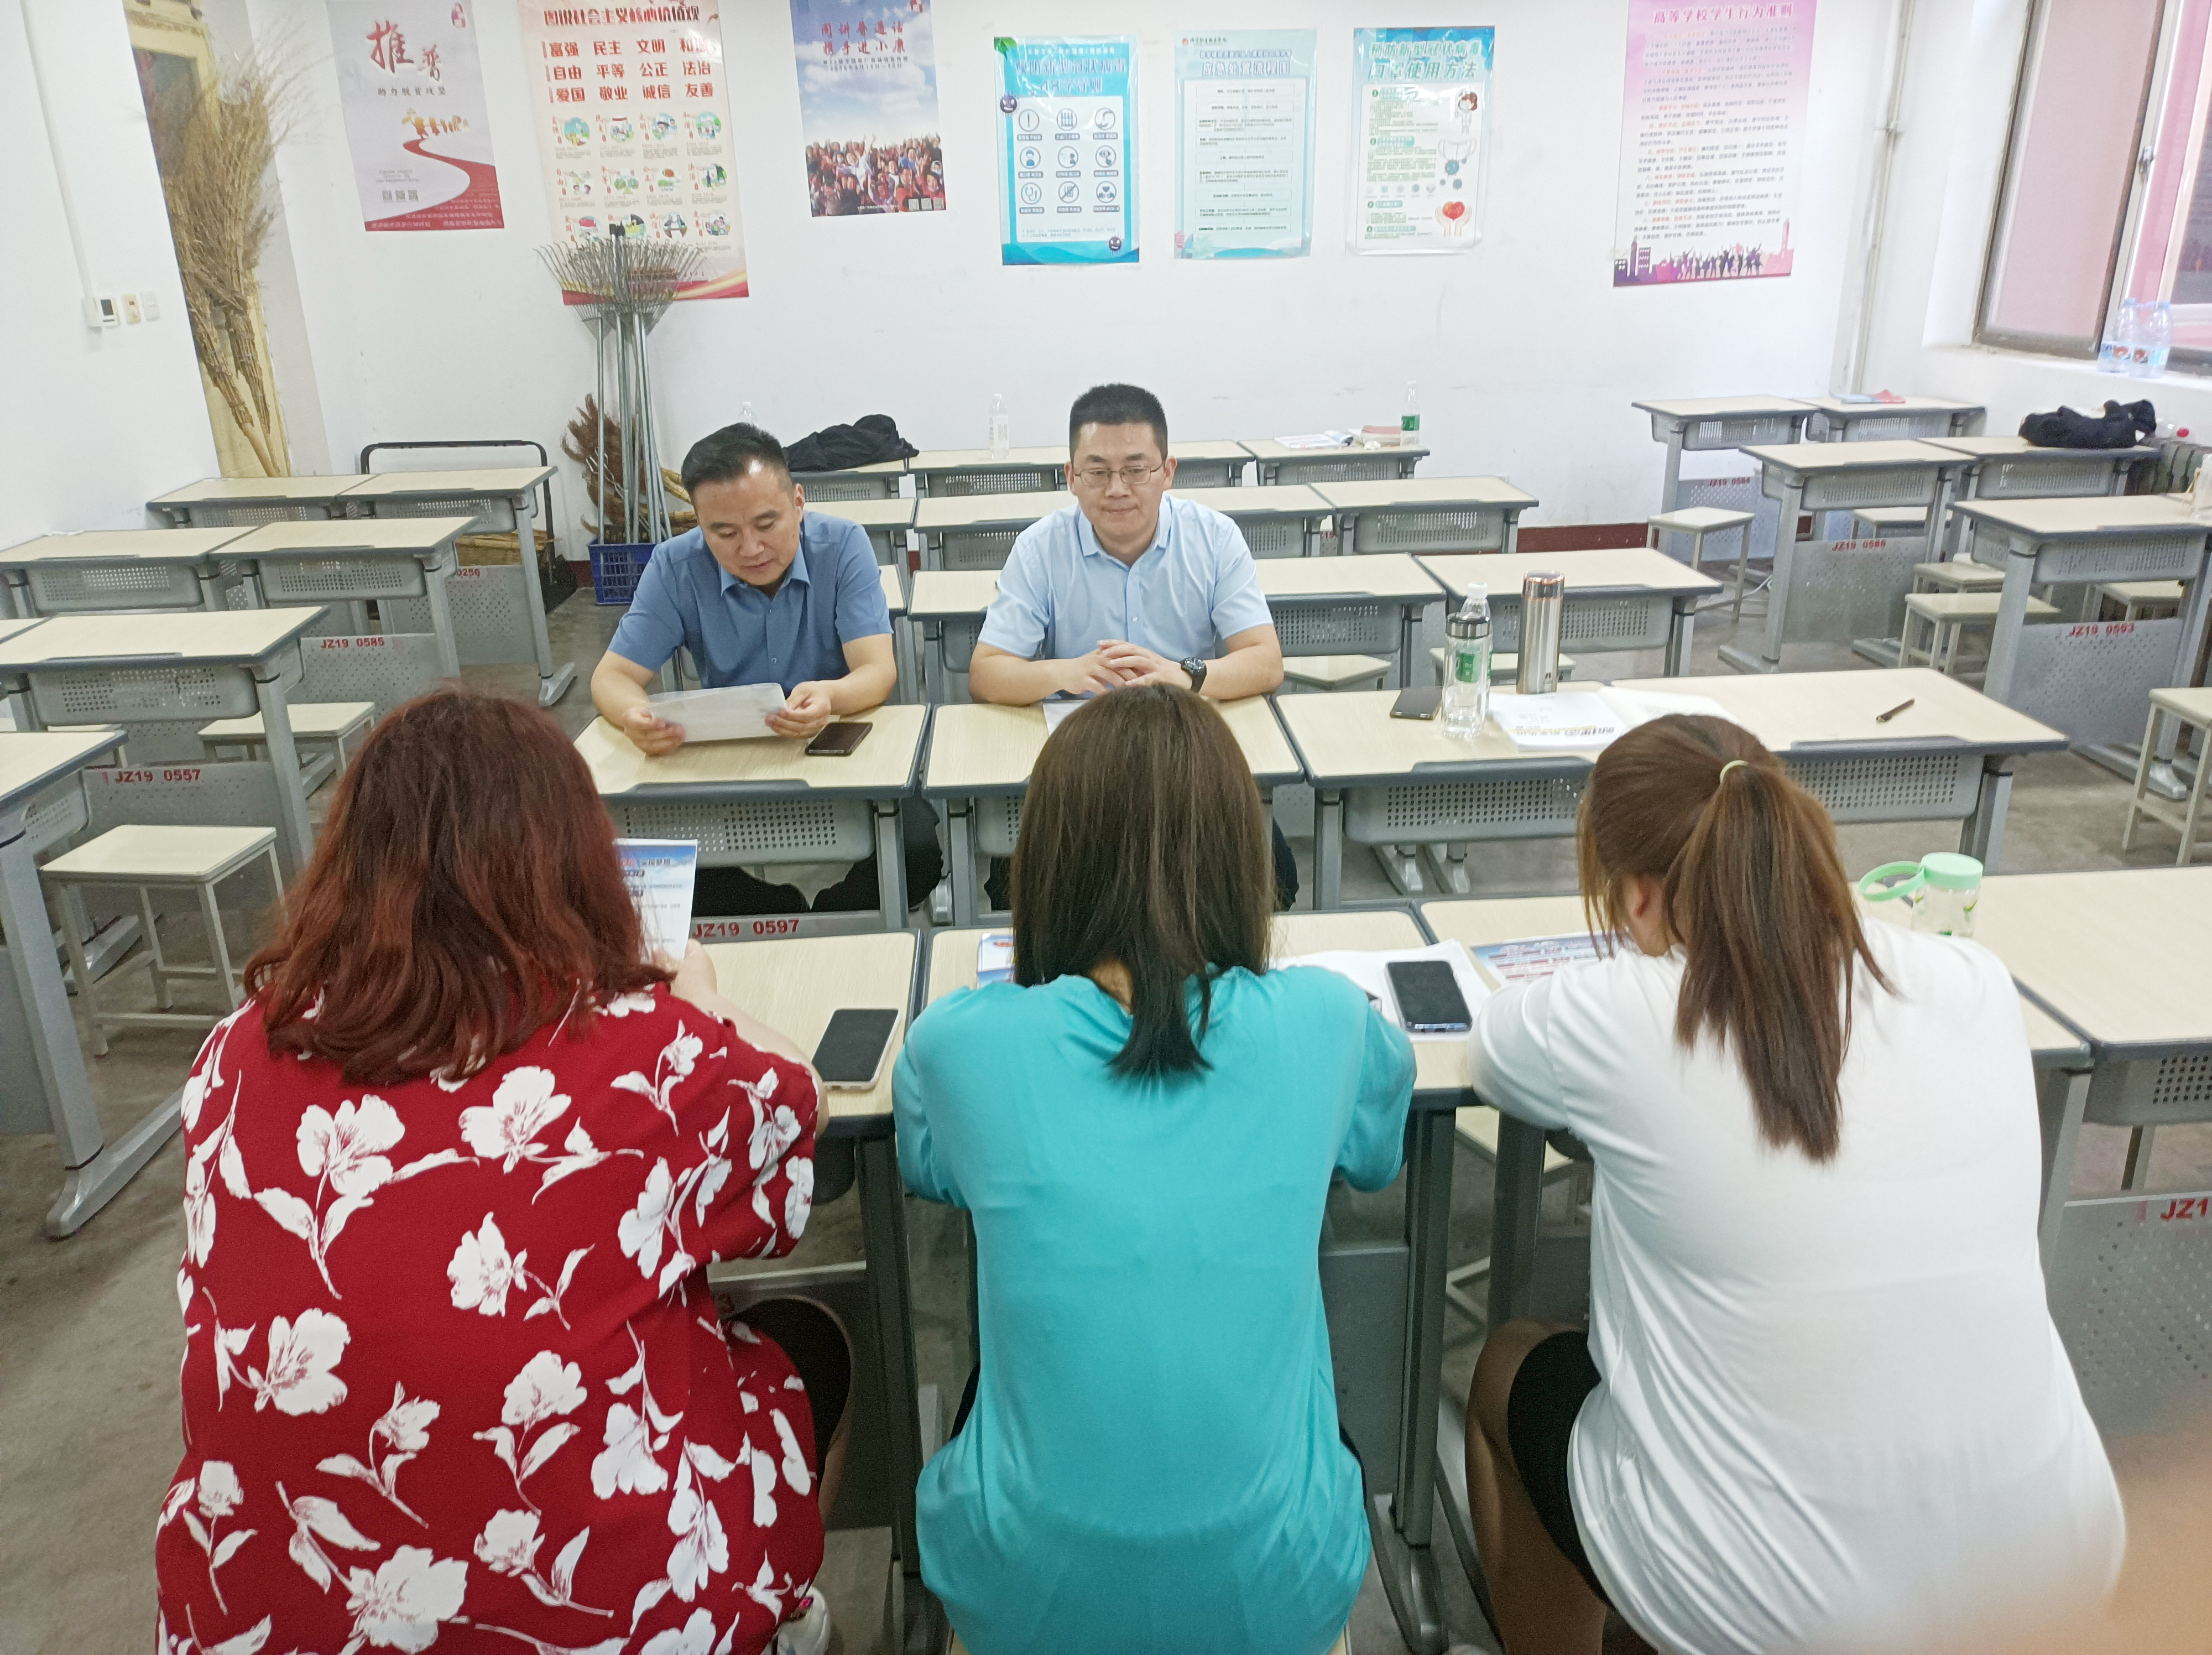 China Coal Group Participate In The Presentation Of The Department Of Electronic Information Engineering Of Jining Vocational And Technical College